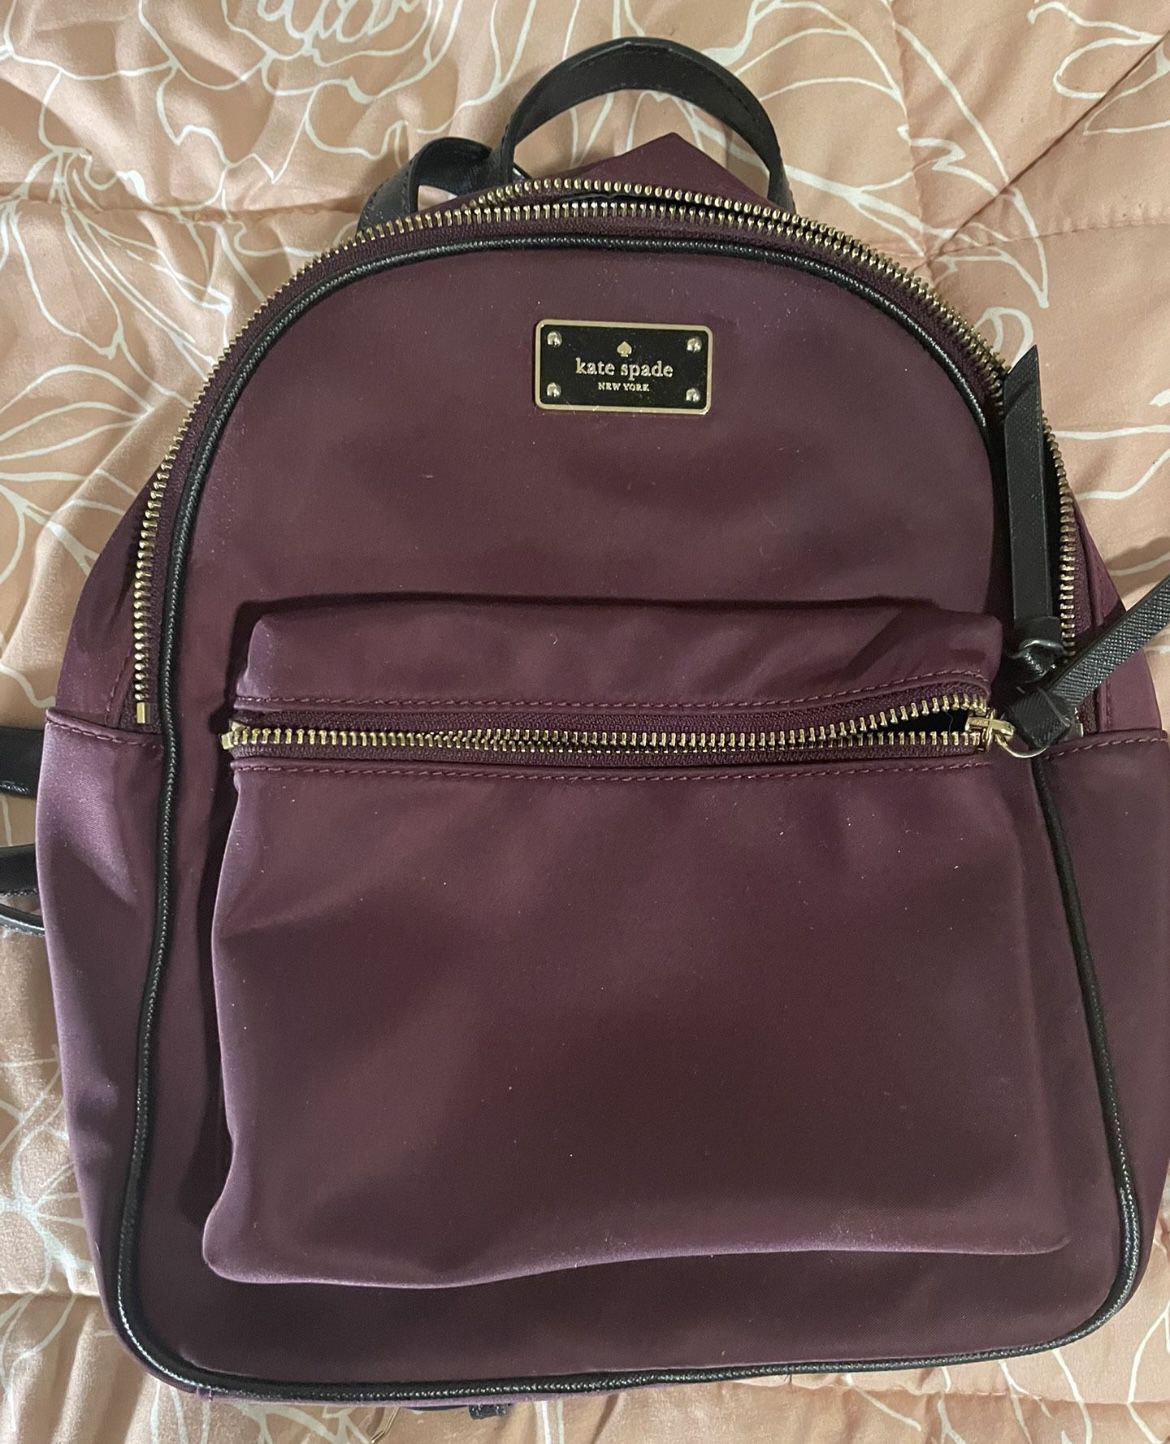 Authentic Kate Spade Backpack 